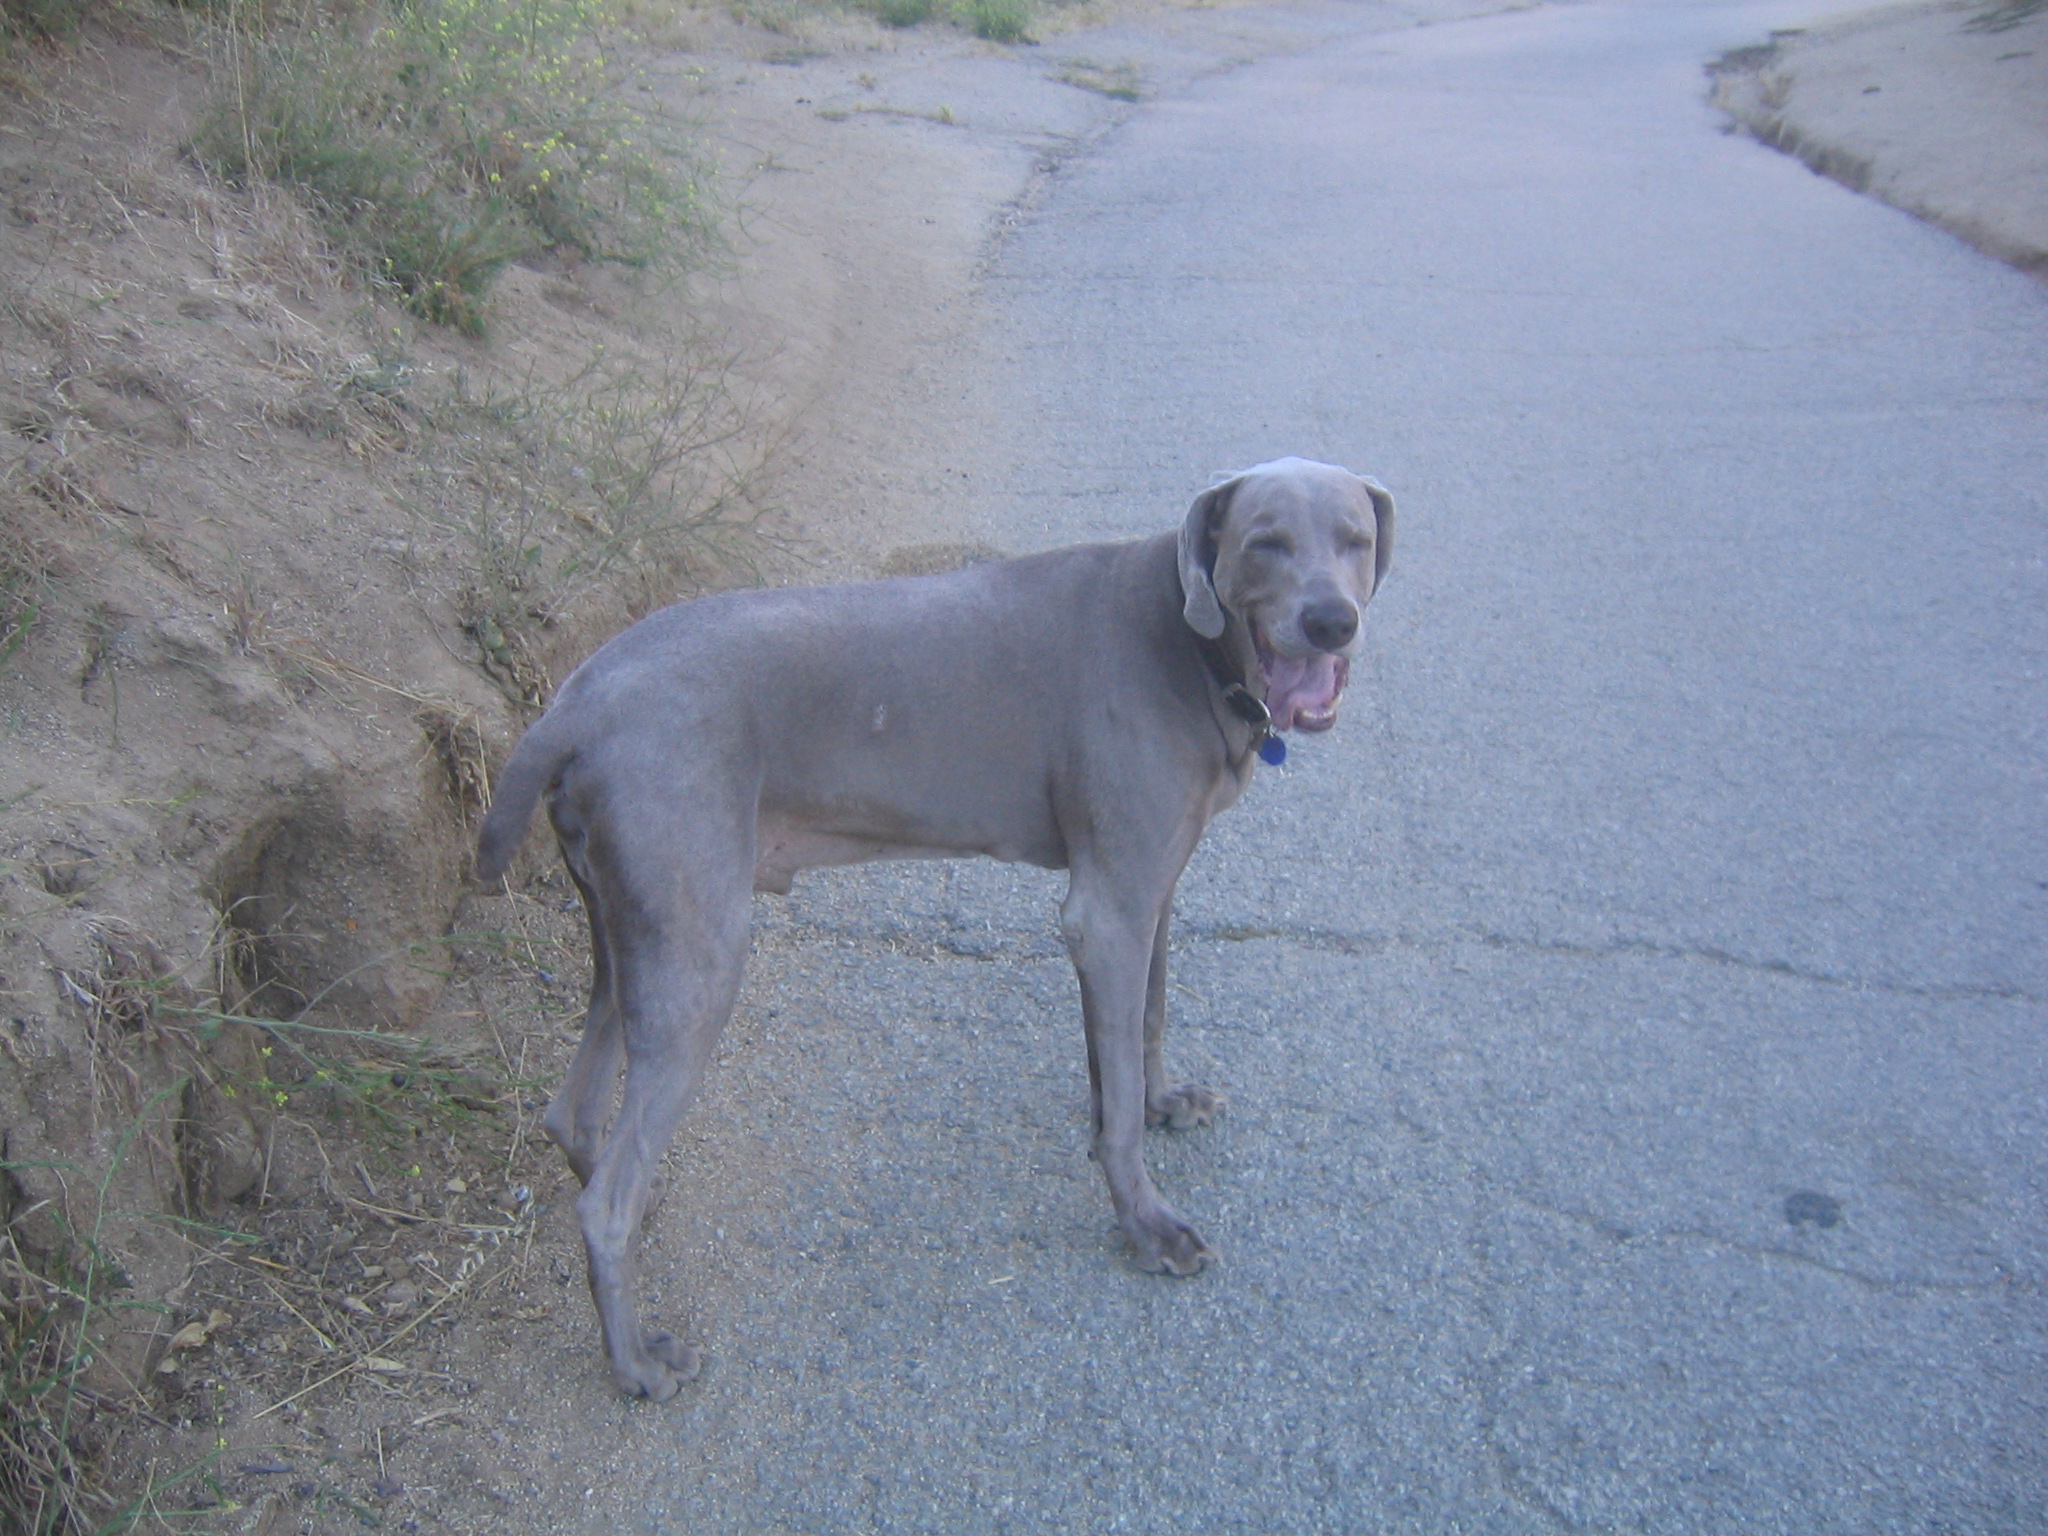 Yeager pauses to check in on me at Runyon, 2005